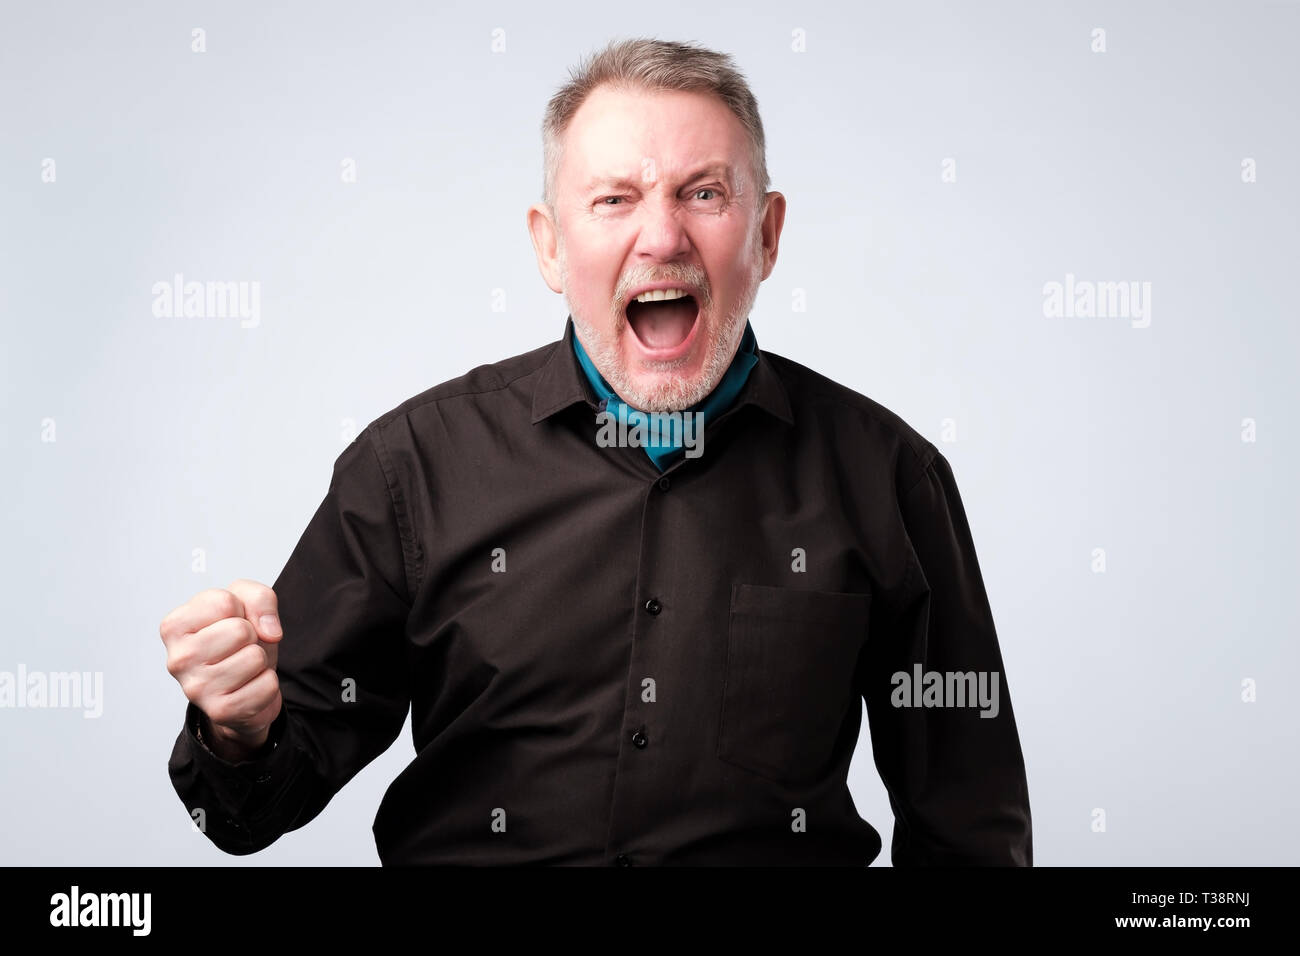 Angry shocked man in black shirt screaming, isolated on white background. Stock Photo